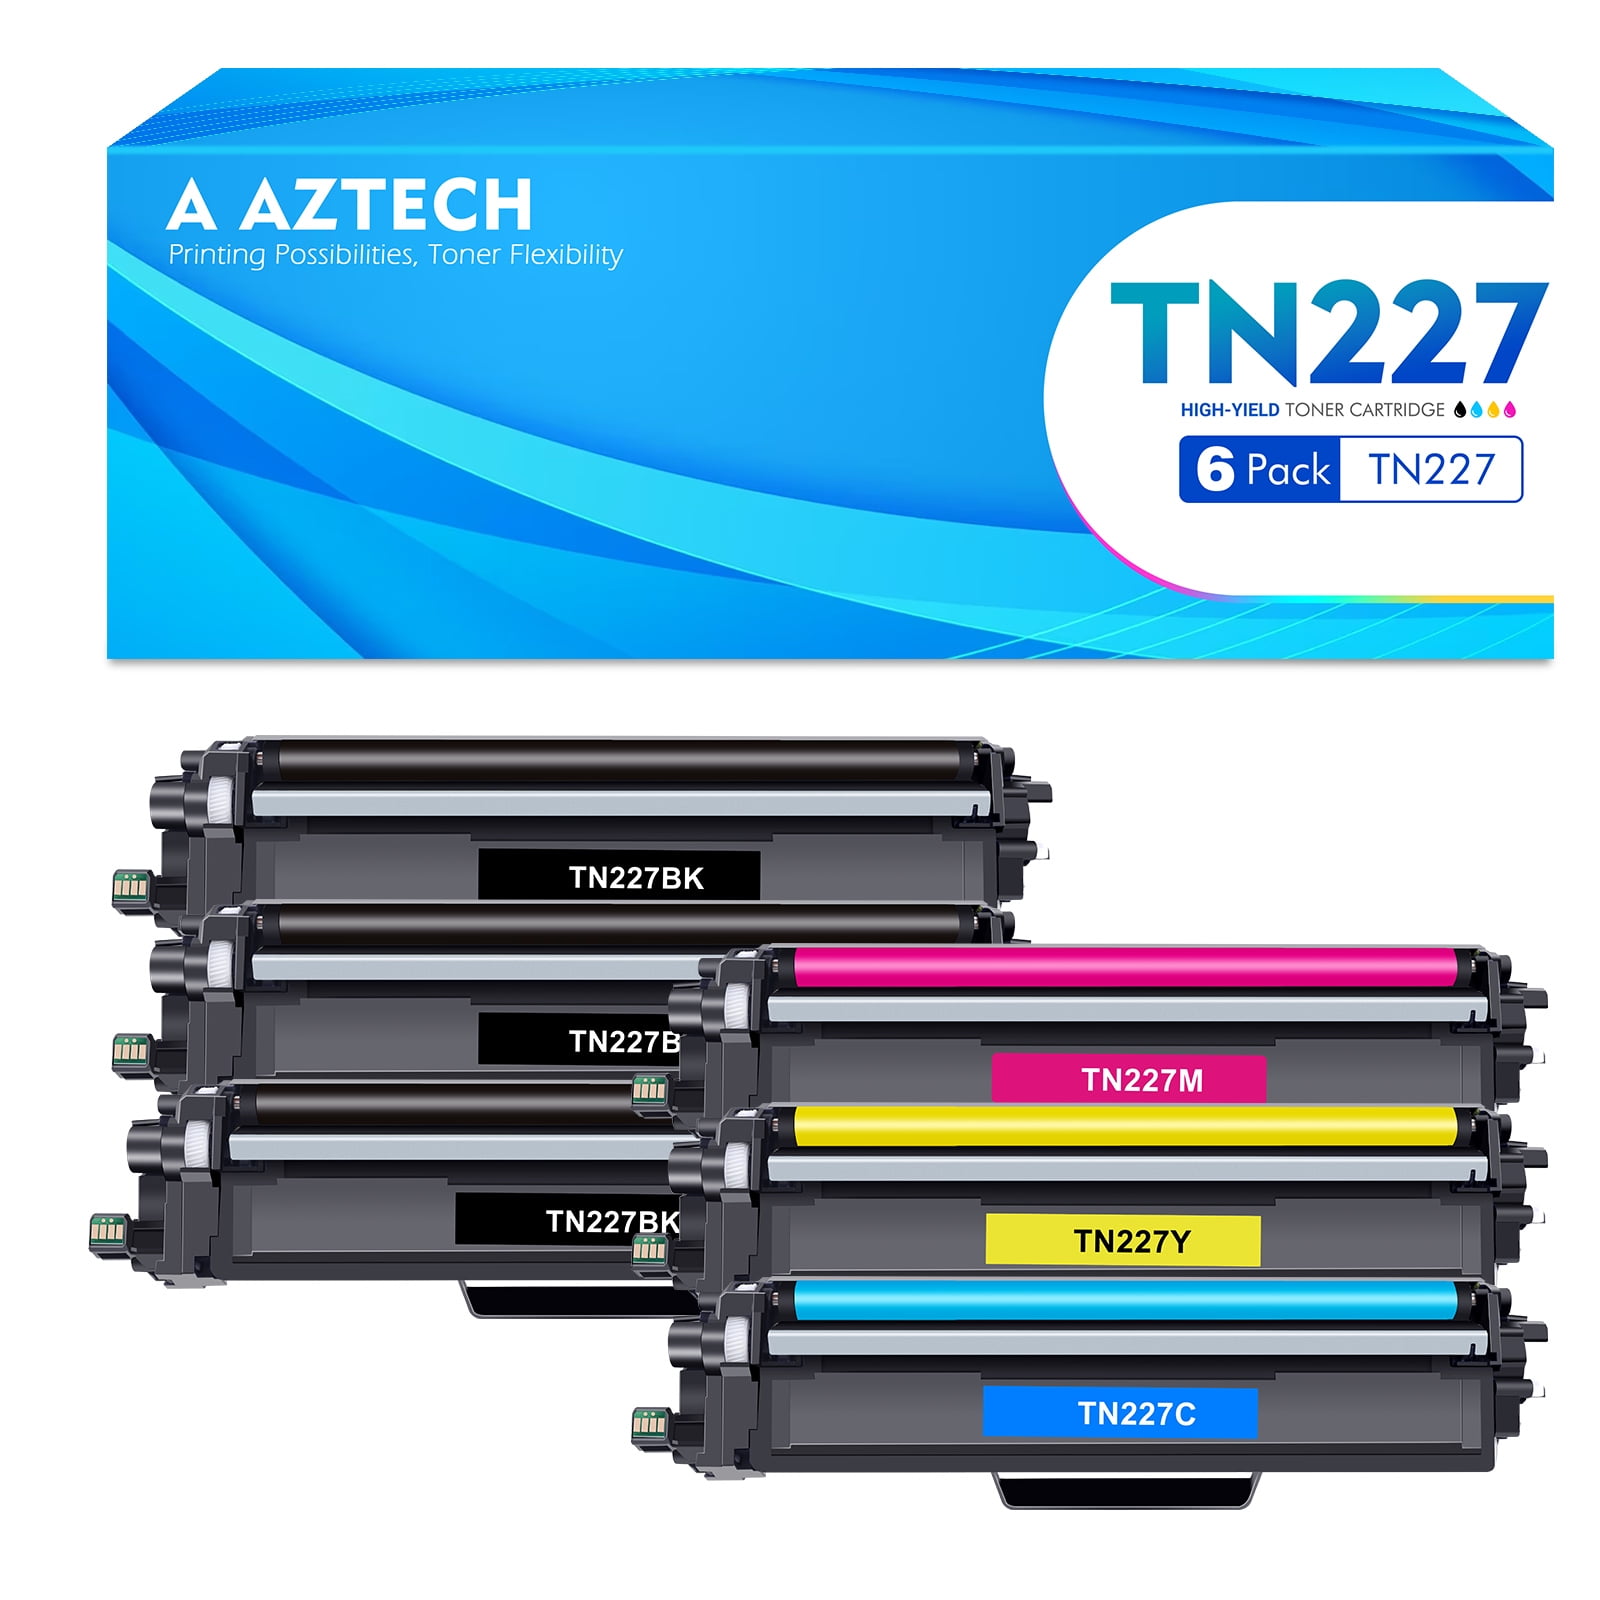 2 Pack Black TN227 High Yield Toner Replacement for Brother MFC-L3710CW  MFC-L3730CDW MFC-L3750CDW MFC-L3770CDW DCP-L3510CDW DCP-L3550CDW HL-L3210CW